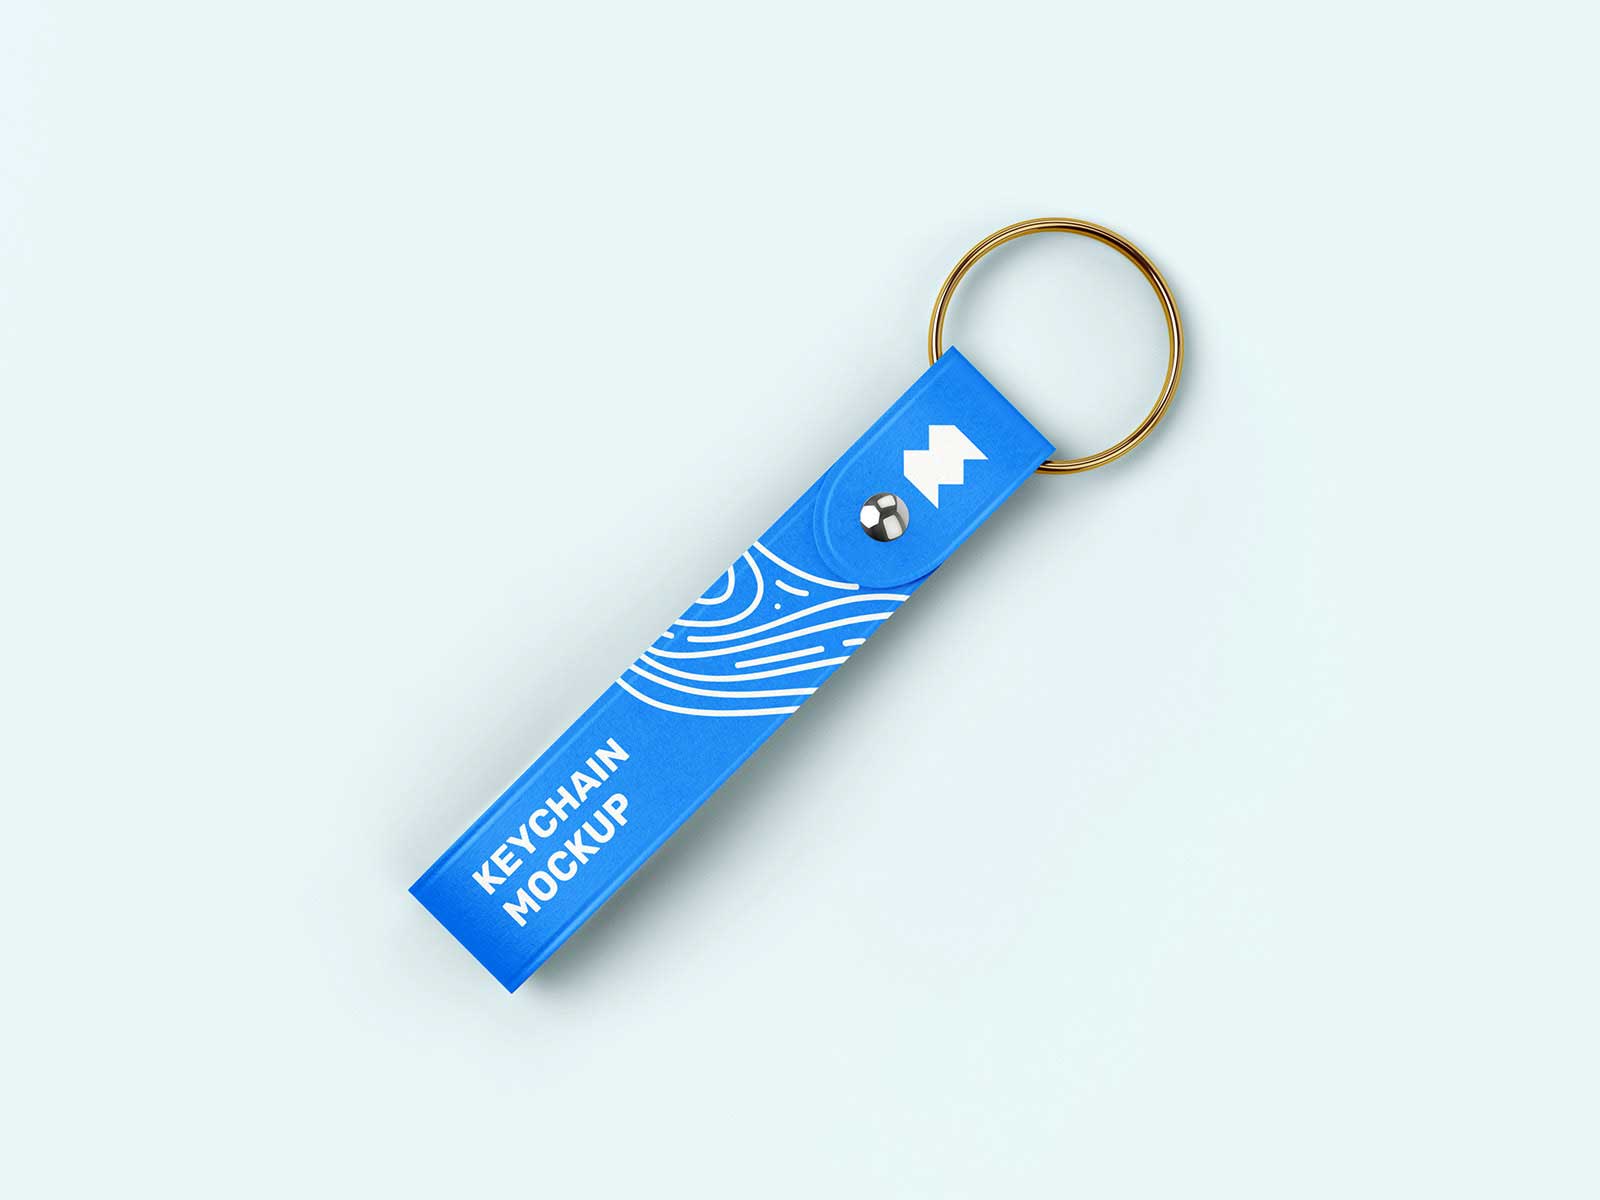 Strap Keychain Mockup Free PSD: Elevate Your Brand with Distinctive Accessories